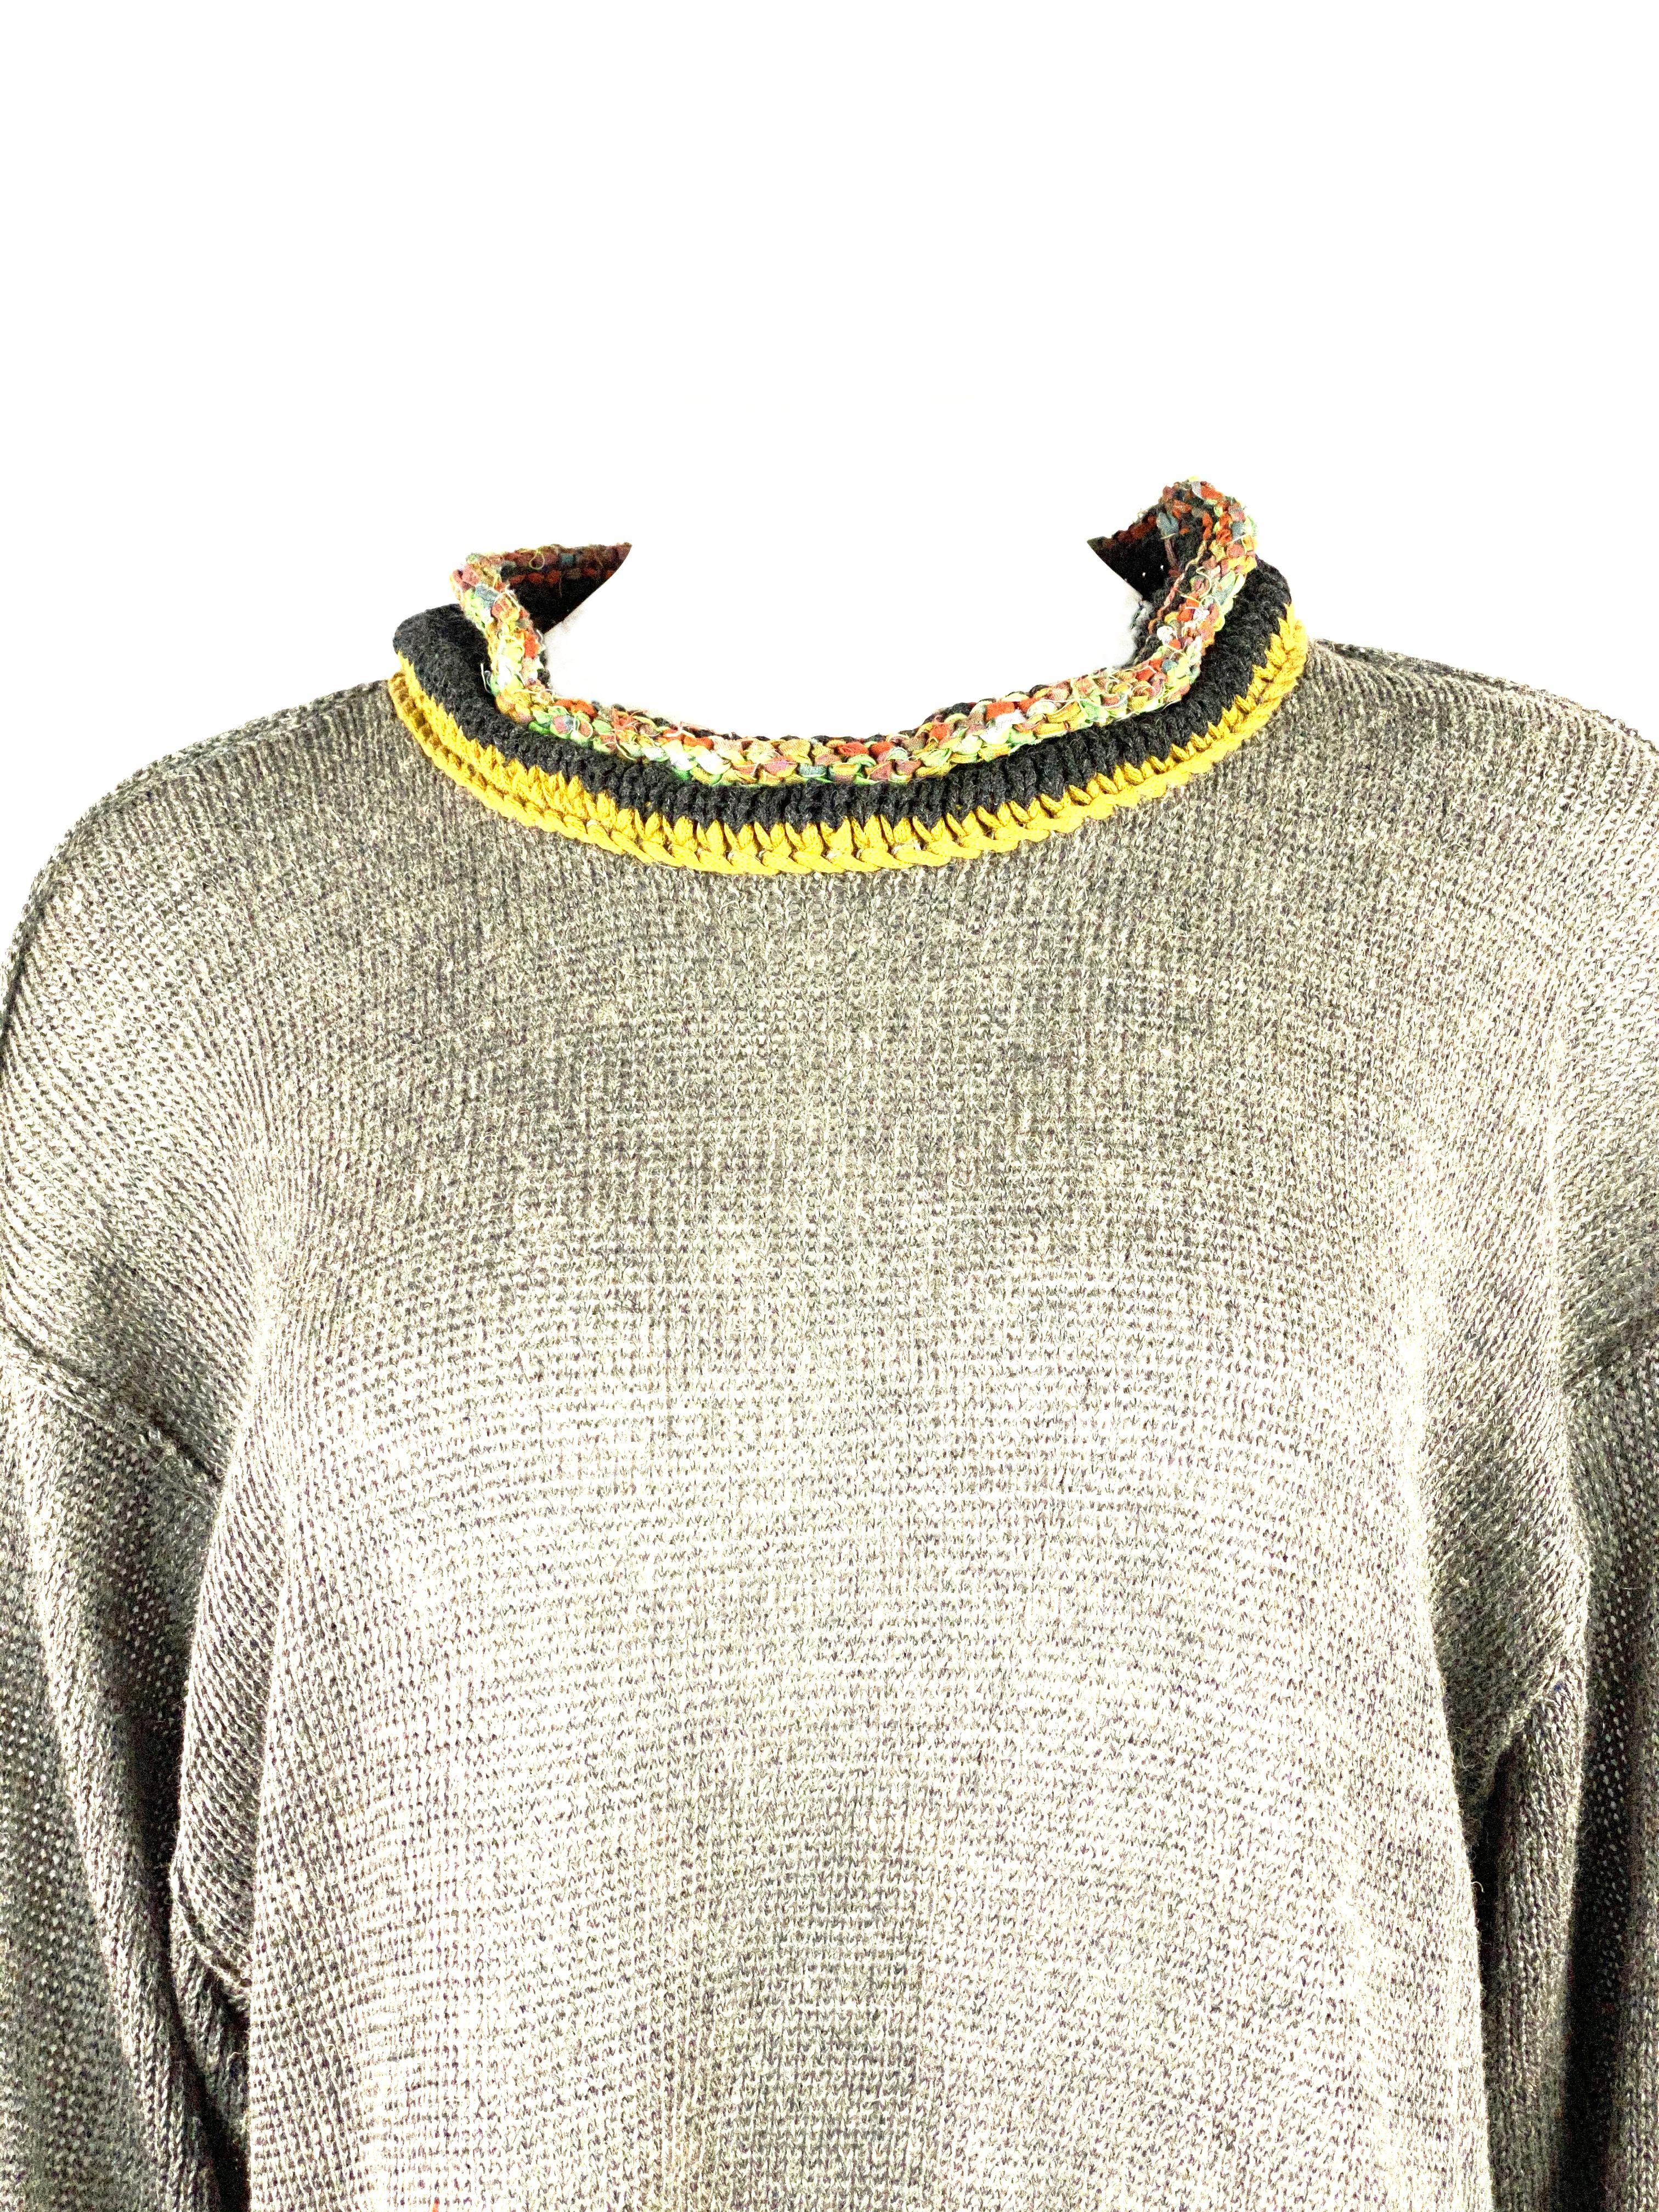 Matsuda Nicole Tokyo Japan Grey Knit Pullover Sweater w/ Beads

Product detail:
Grey, white, yellow 
Collar
Long sleeves
Lose fit 
Featuring front and rare cut outs w/ beads and seashells details
Made in Japan

